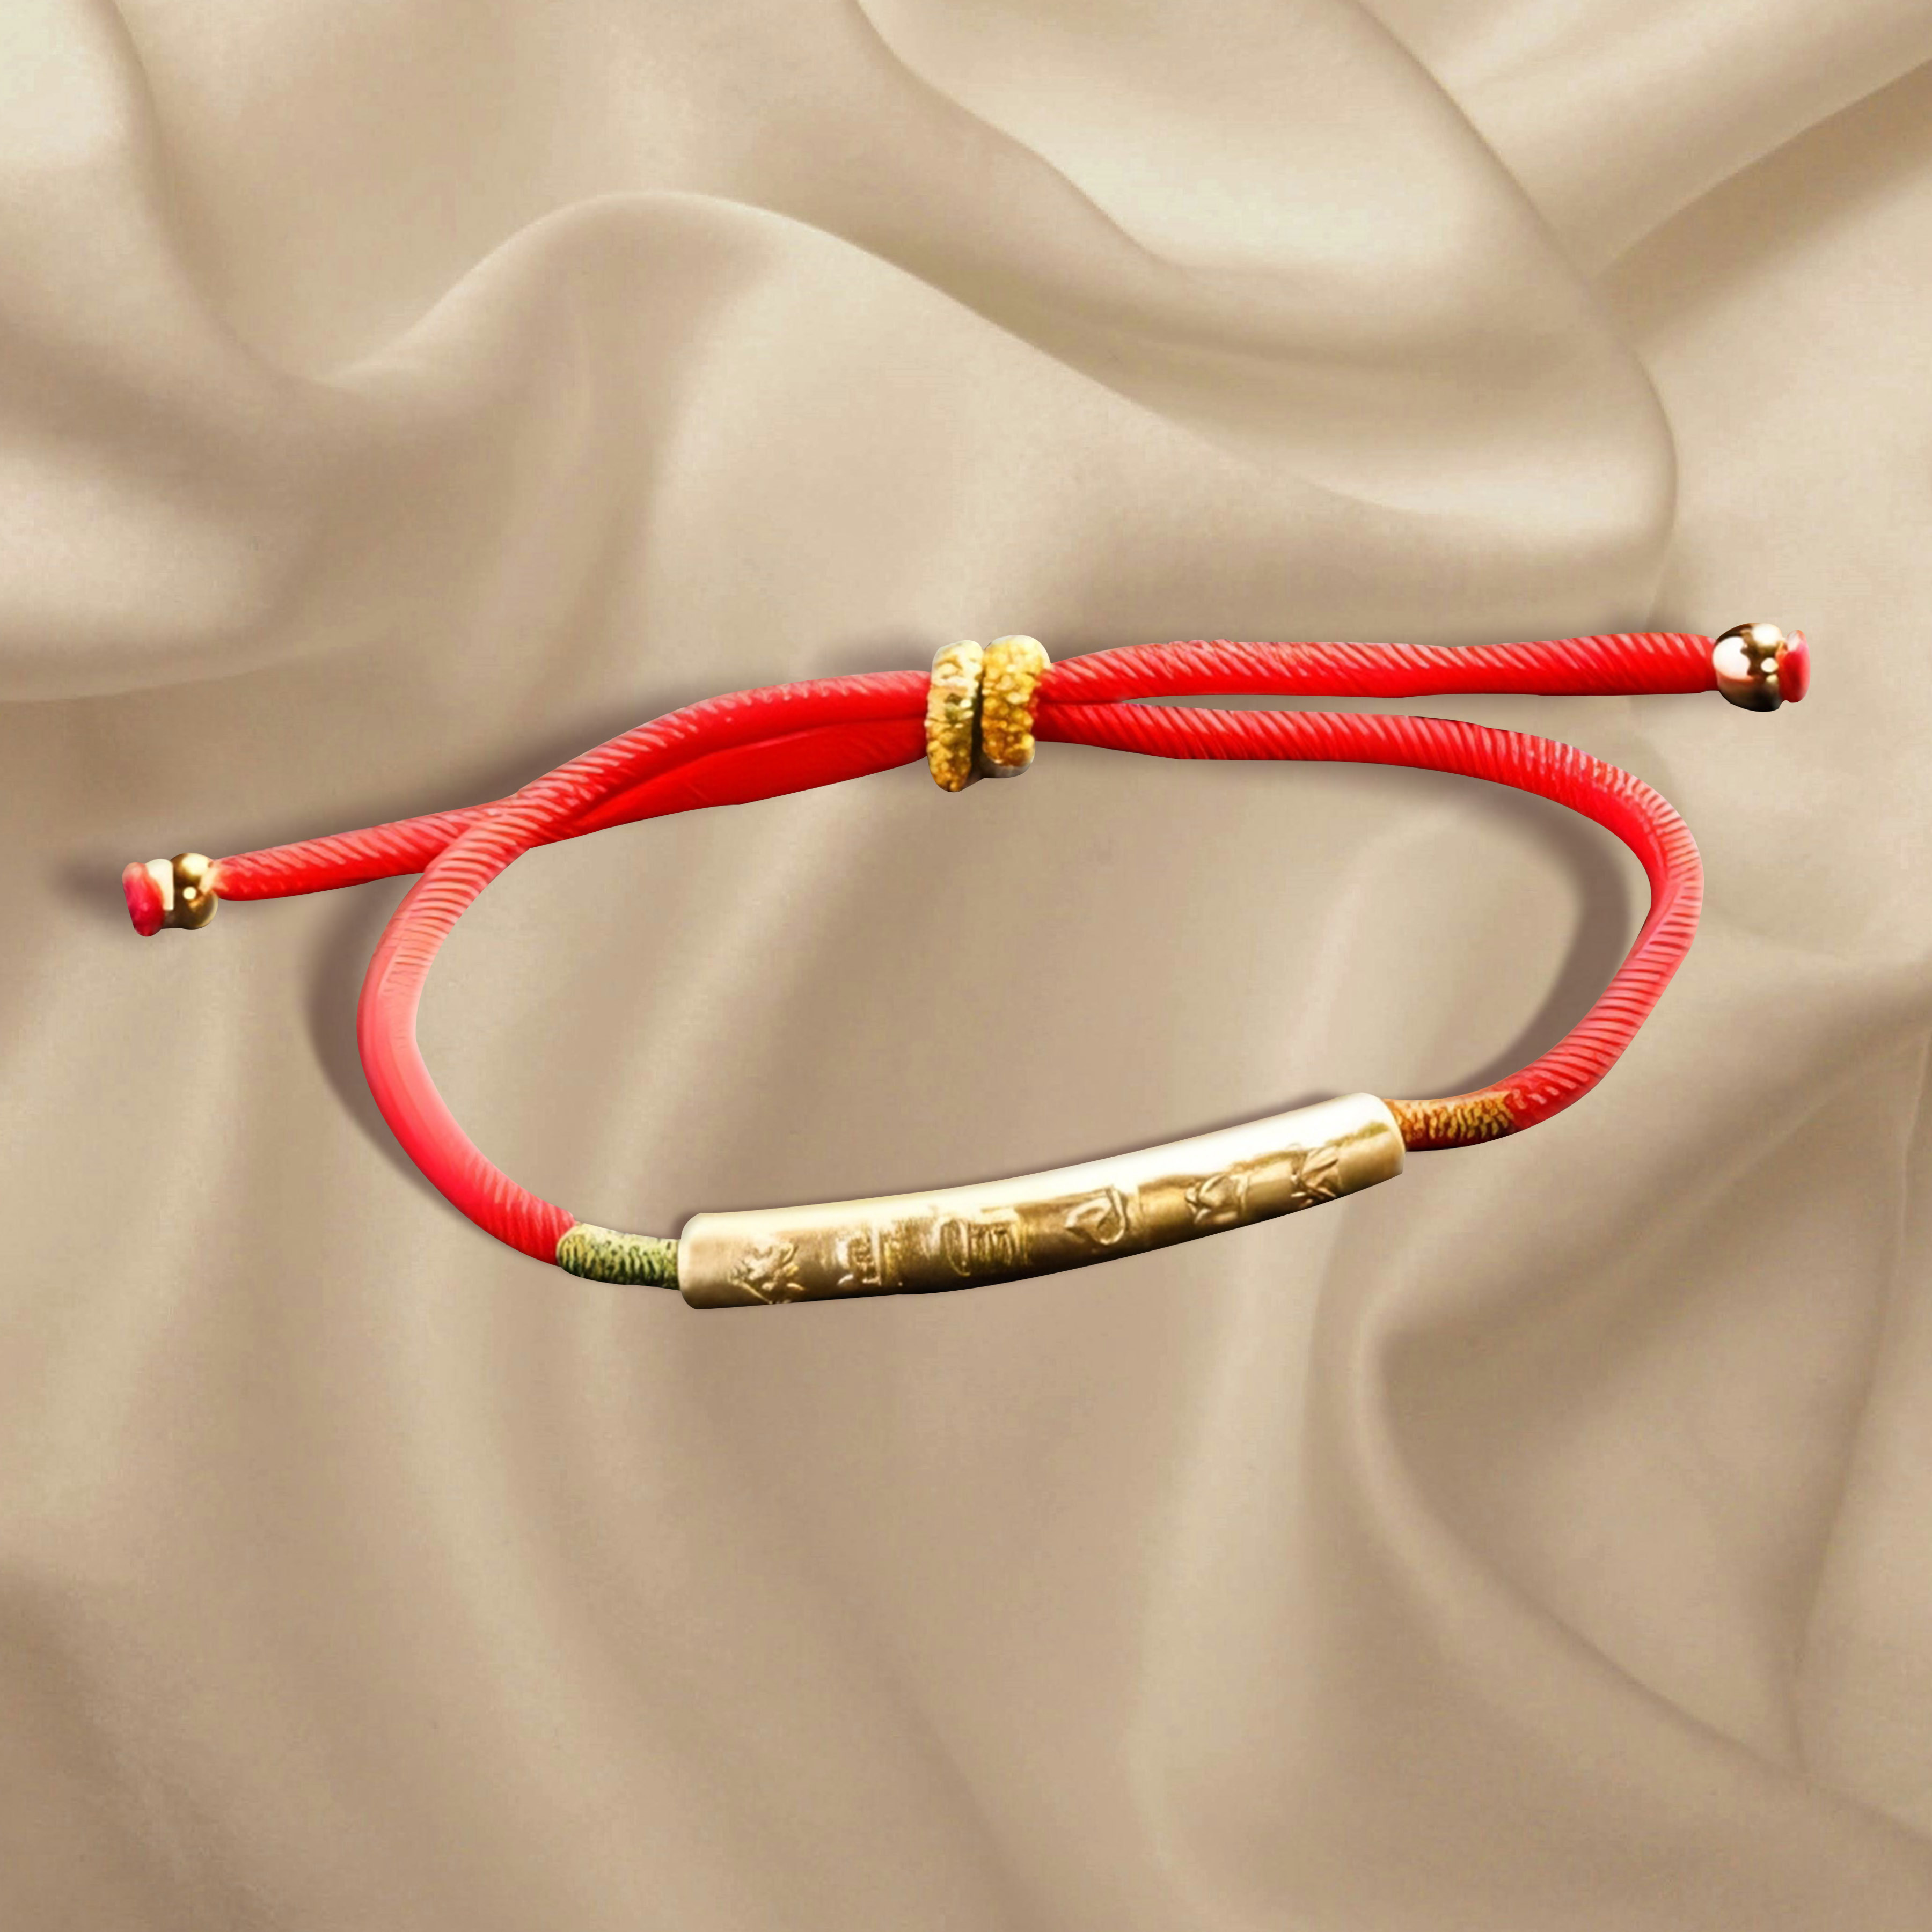 Lucklumen  Tibetan Bracelet Red String Bracelet Buddhist Lucky Charm At Attracts Wealth and Success 